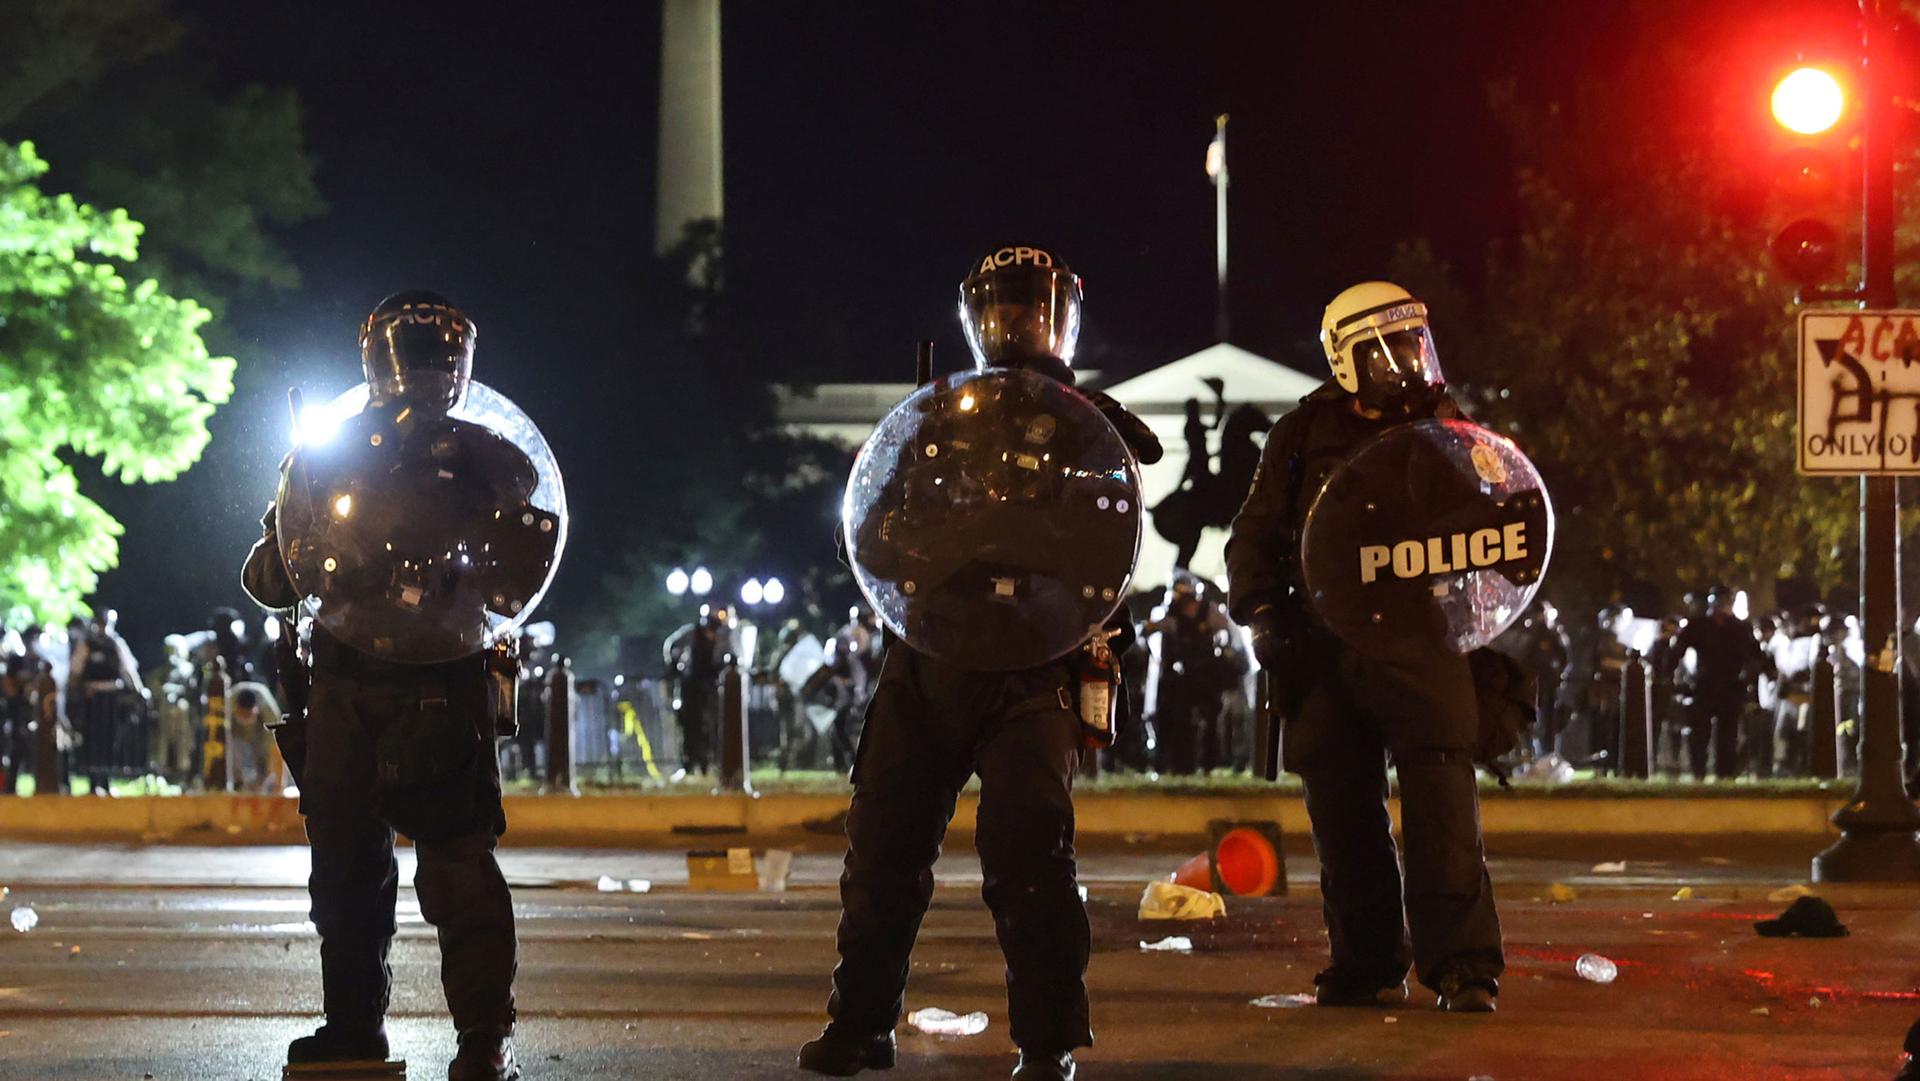 Several police officers are shown carrying shields and wearing riot gear with the White House in the background.